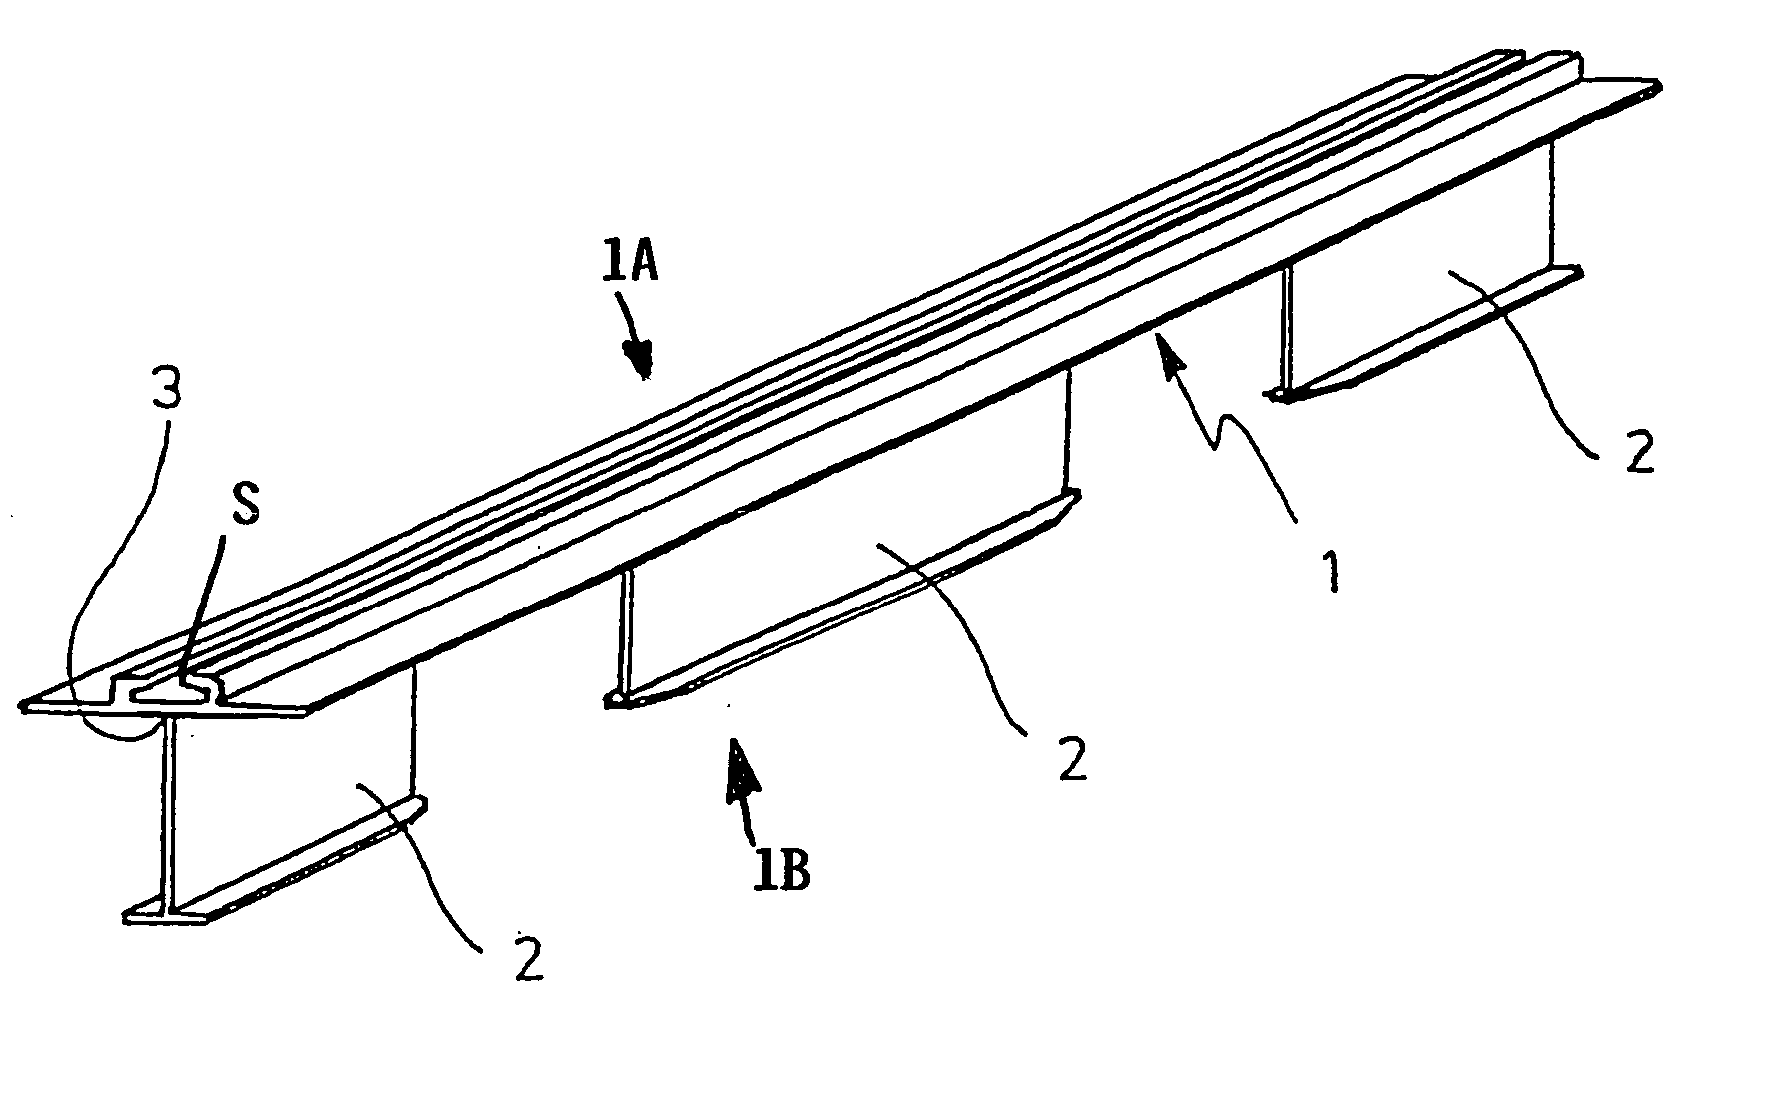 Seat mounting rail, particularly for a commercial aircraft